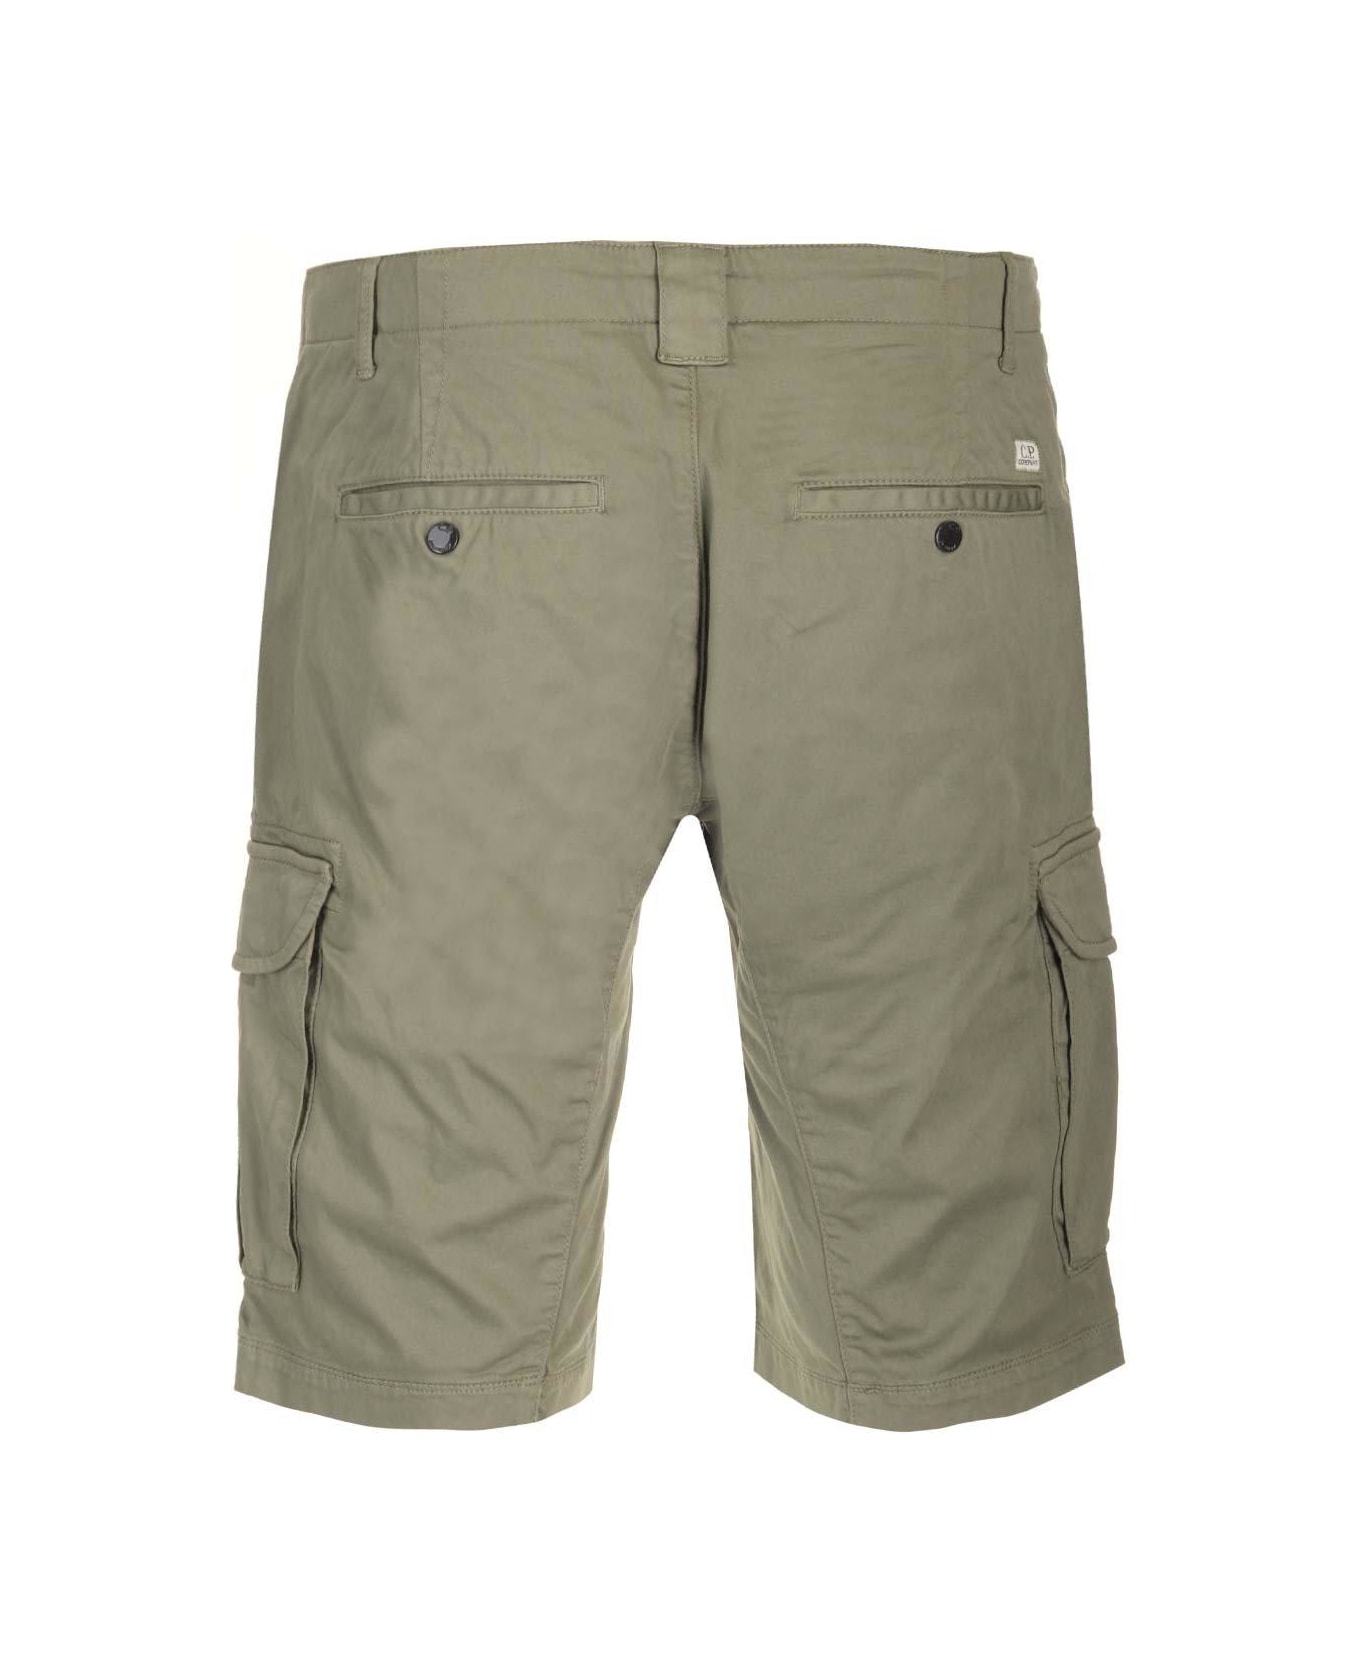 C.P. Company Lens-detailed Cargo Shorts - Agave green